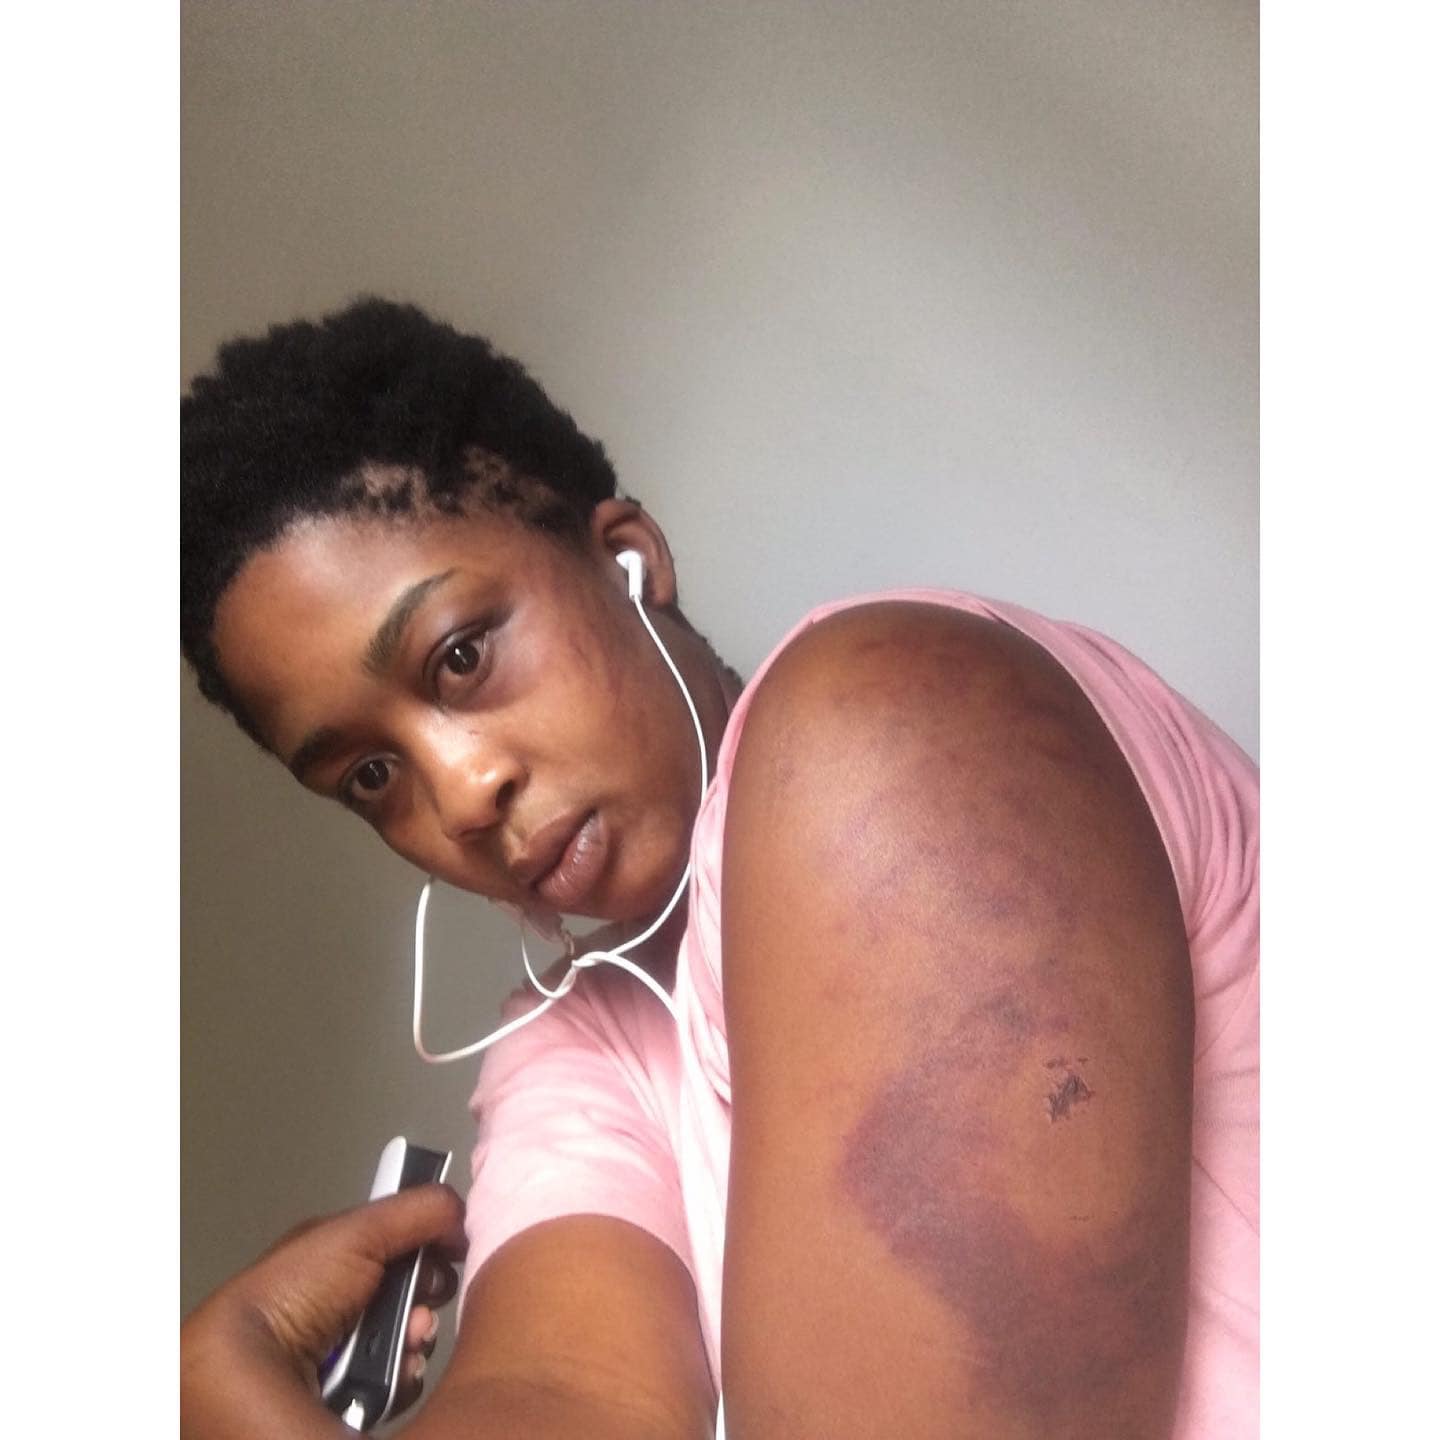 Trish Chinhau shows off her bruises following the assault